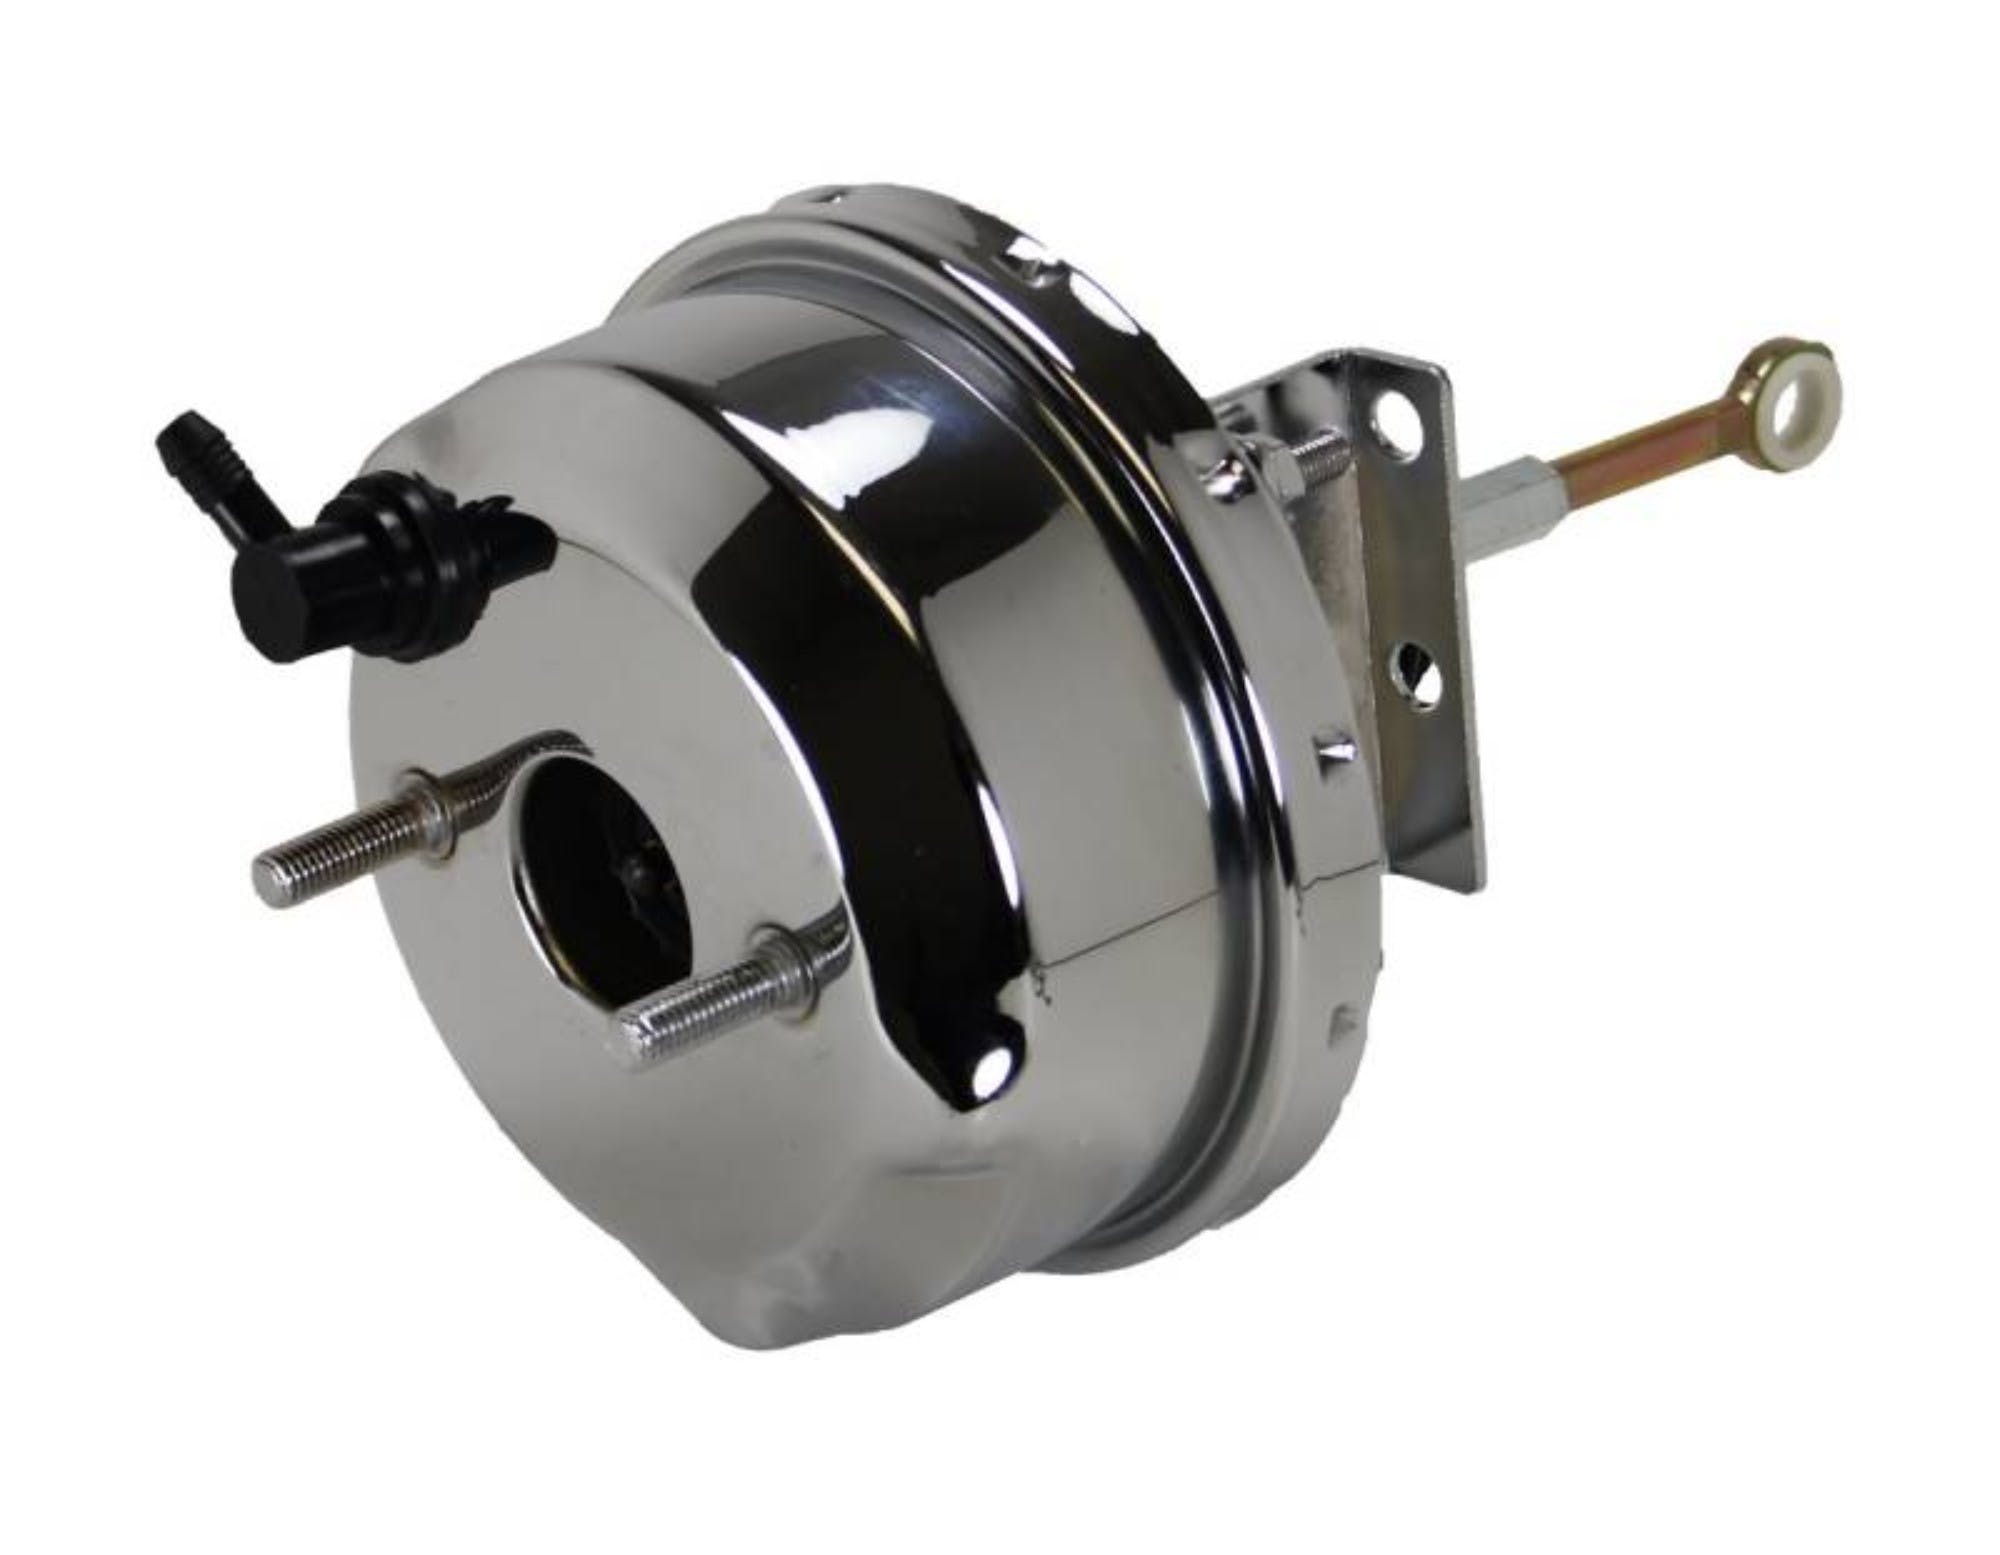 LEED Brakes 6J 7 in Power Brake Booster with brackets (chrome)